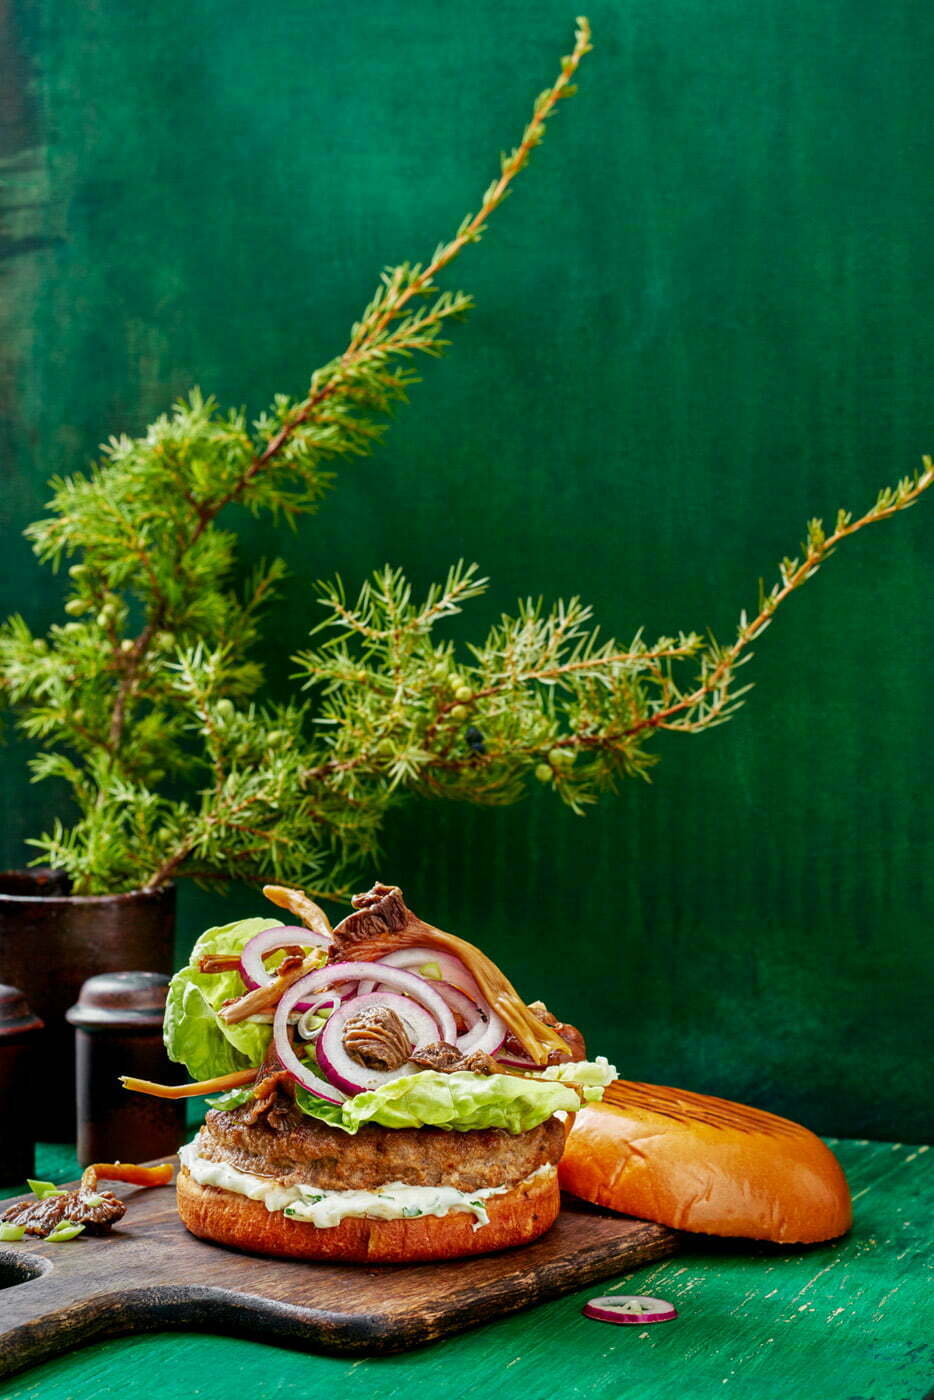 A_hamburger_made_by_game_meat_and_funnel_chanterelles_with_green_background_for_Metästäjä_magazine_by_Elina_Himanen